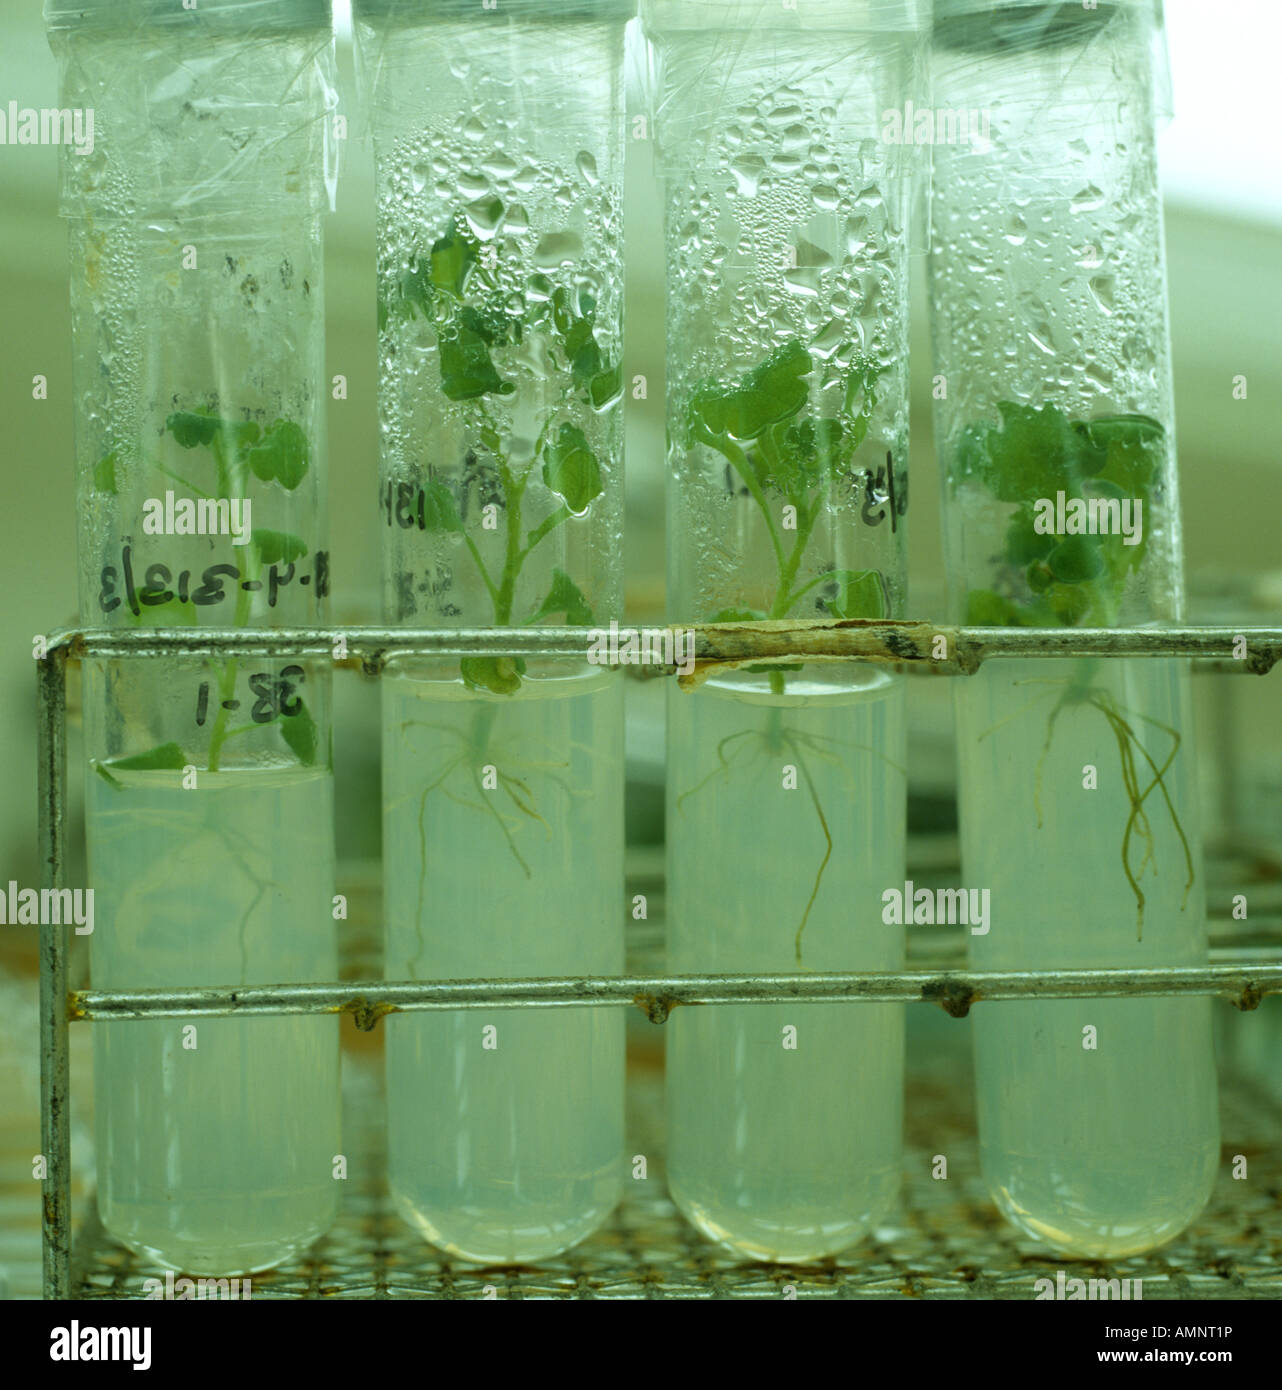 Micropropagation of plant tissue in test tubes reared in a constant environment chamber Stock Photo